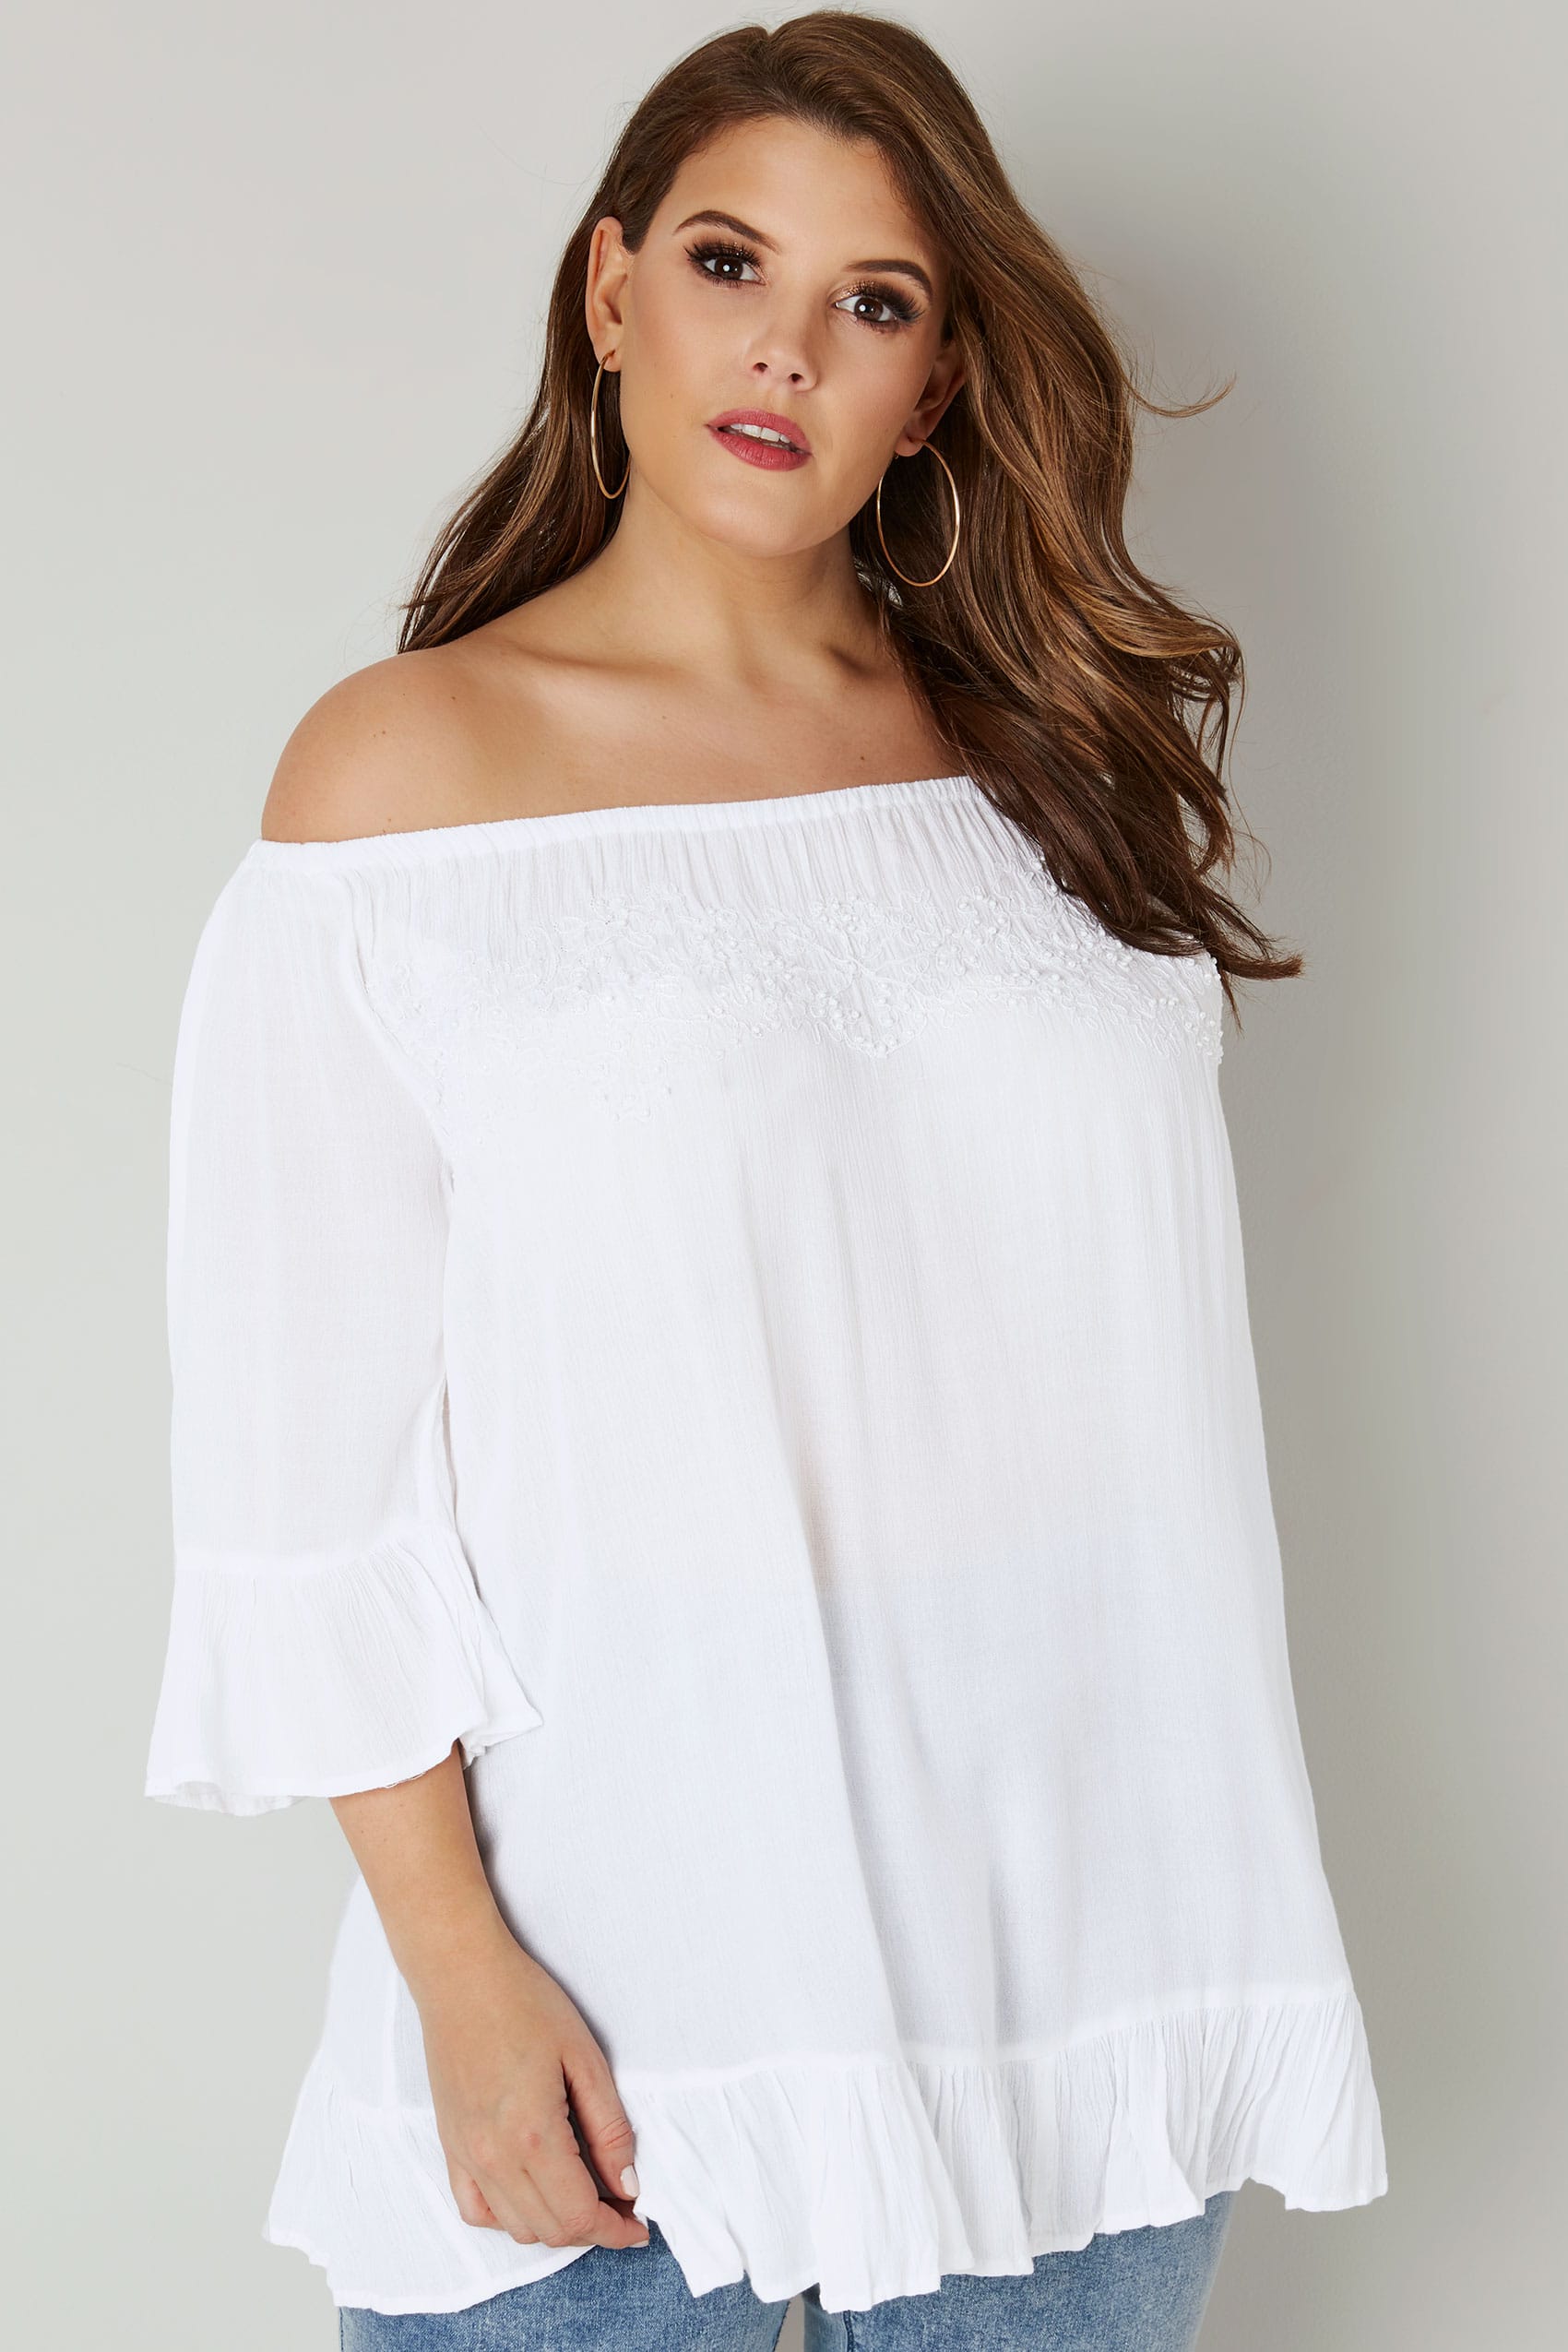 White Bardot Gypsy Top With Beaded Details & Flute Sleeves, Plus size 16 to 36